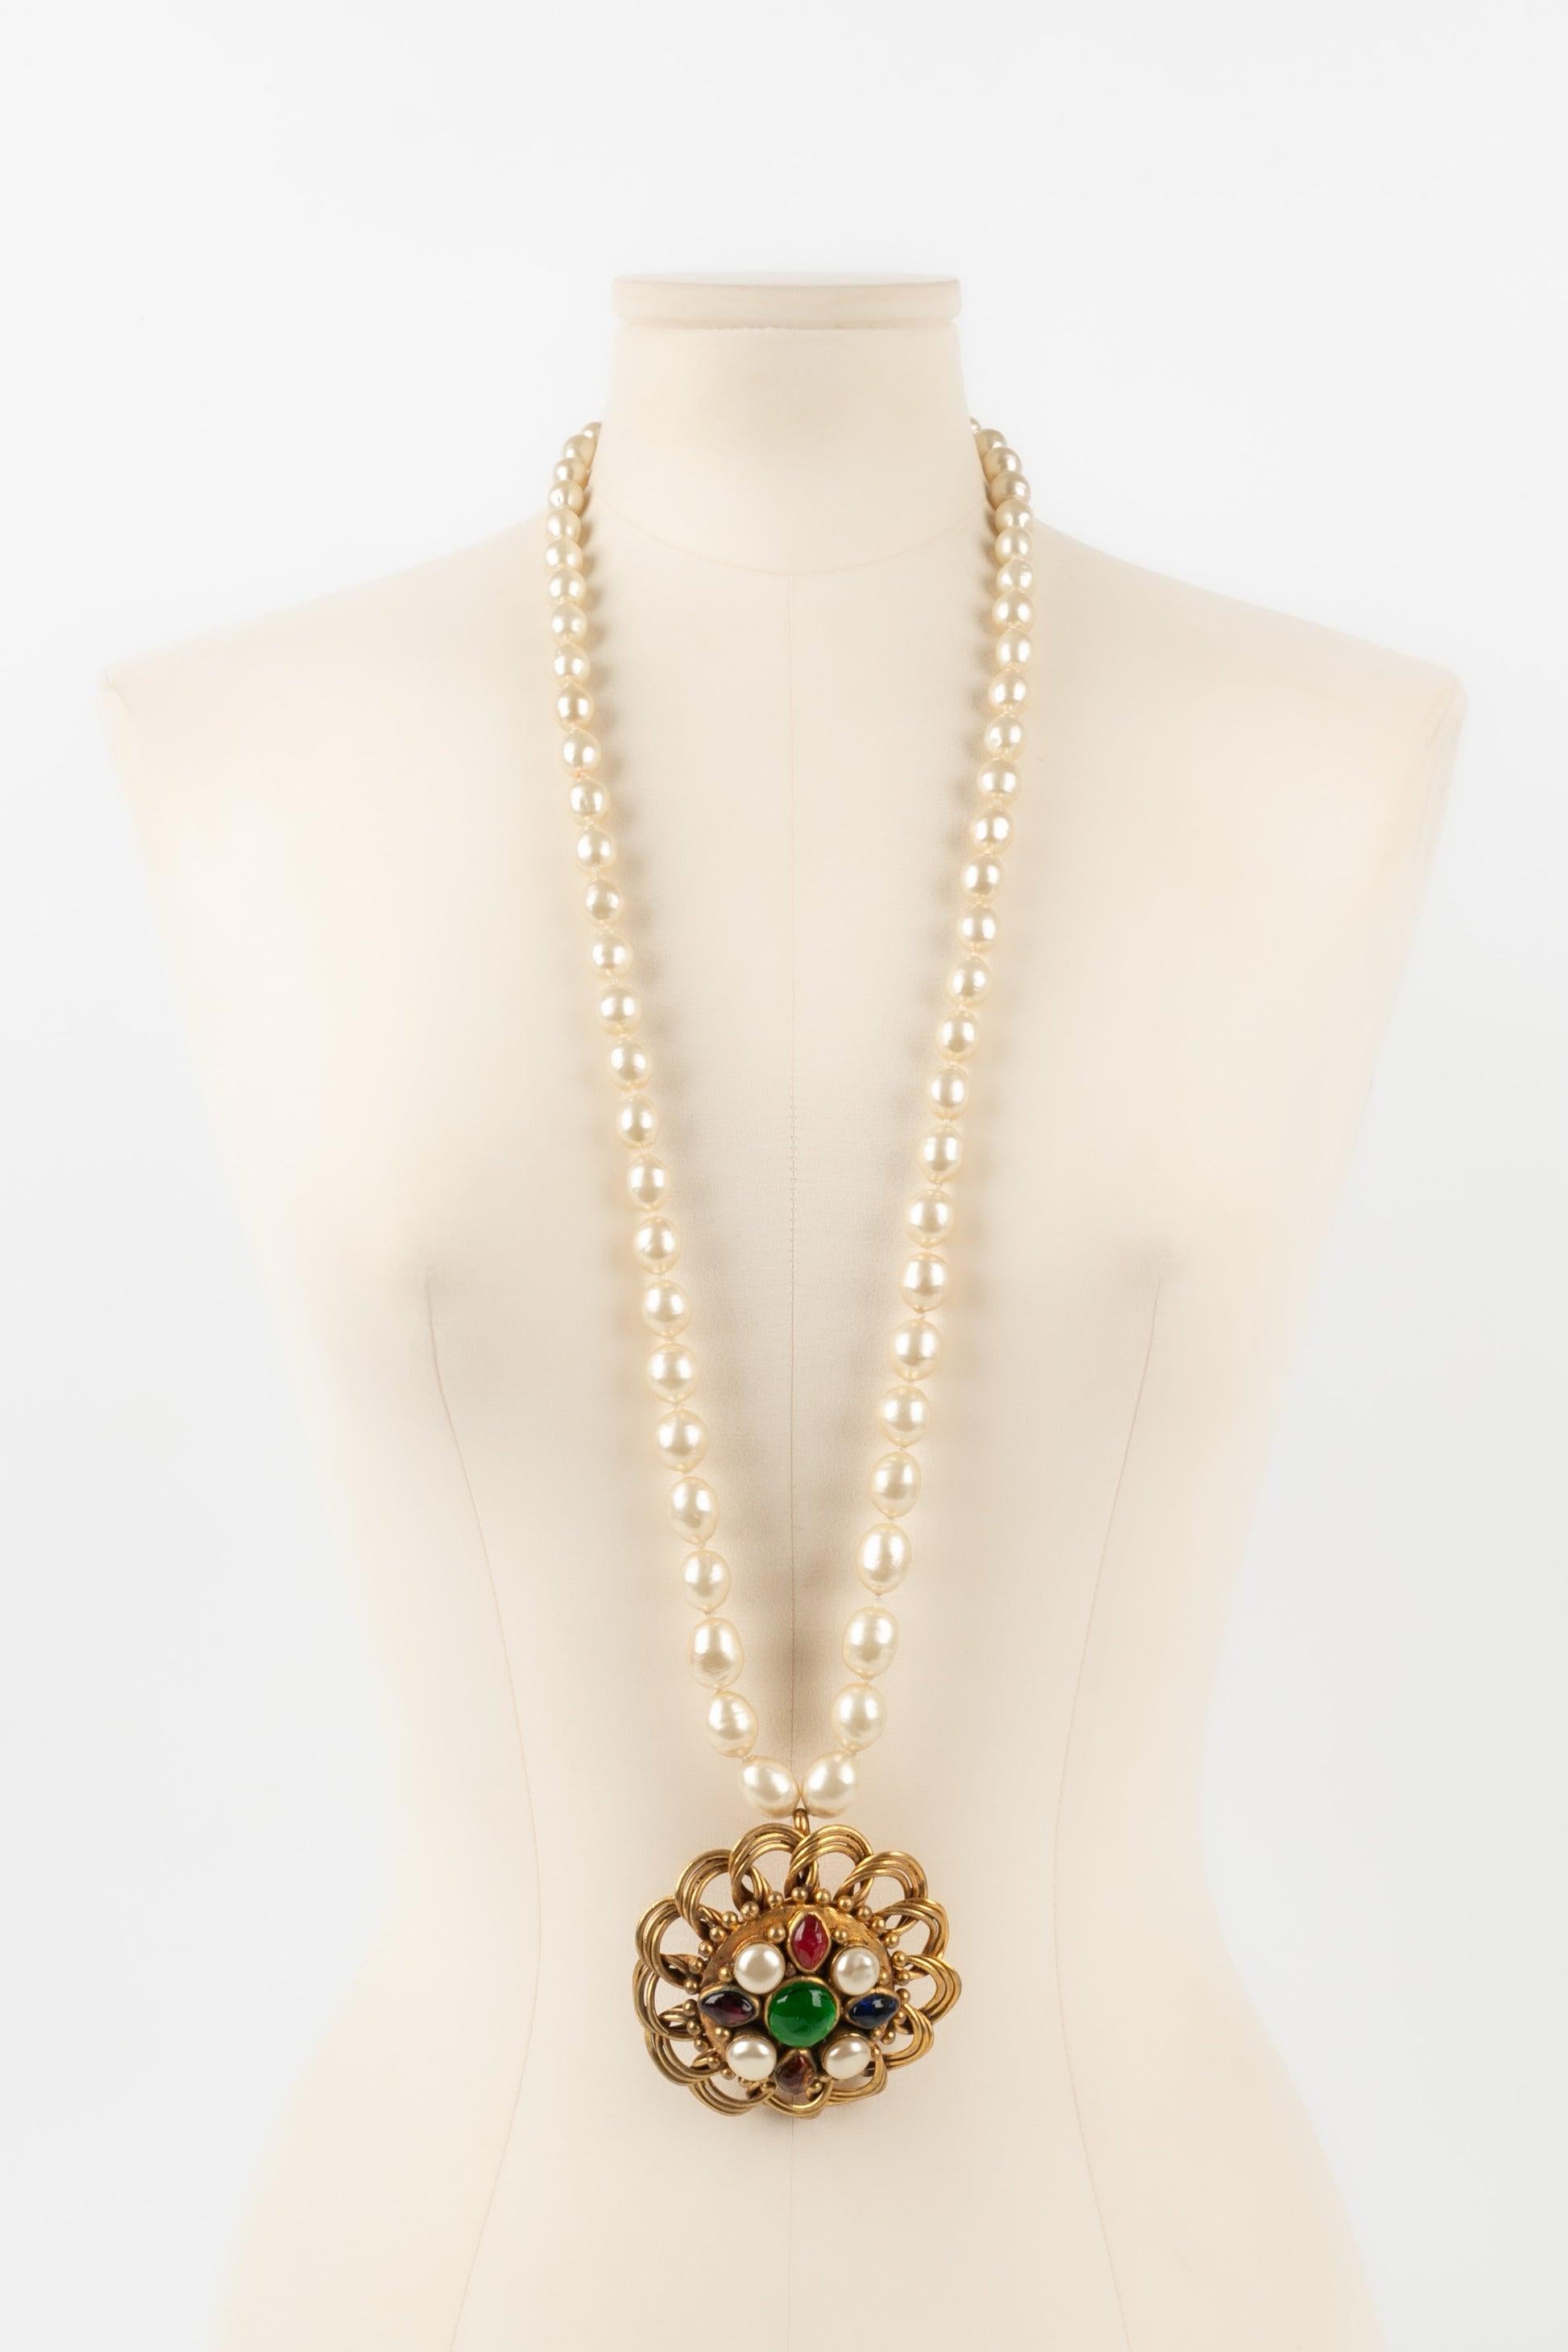 Chanel - (Made in France) Costume pearl necklace with a golden metal pendant ornamented with glass paste cabochons. 1984 Collection.

Additional information:
Condition: Good condition
Dimensions: Necklace length: 93 cm - Pendant diameter: 7.5